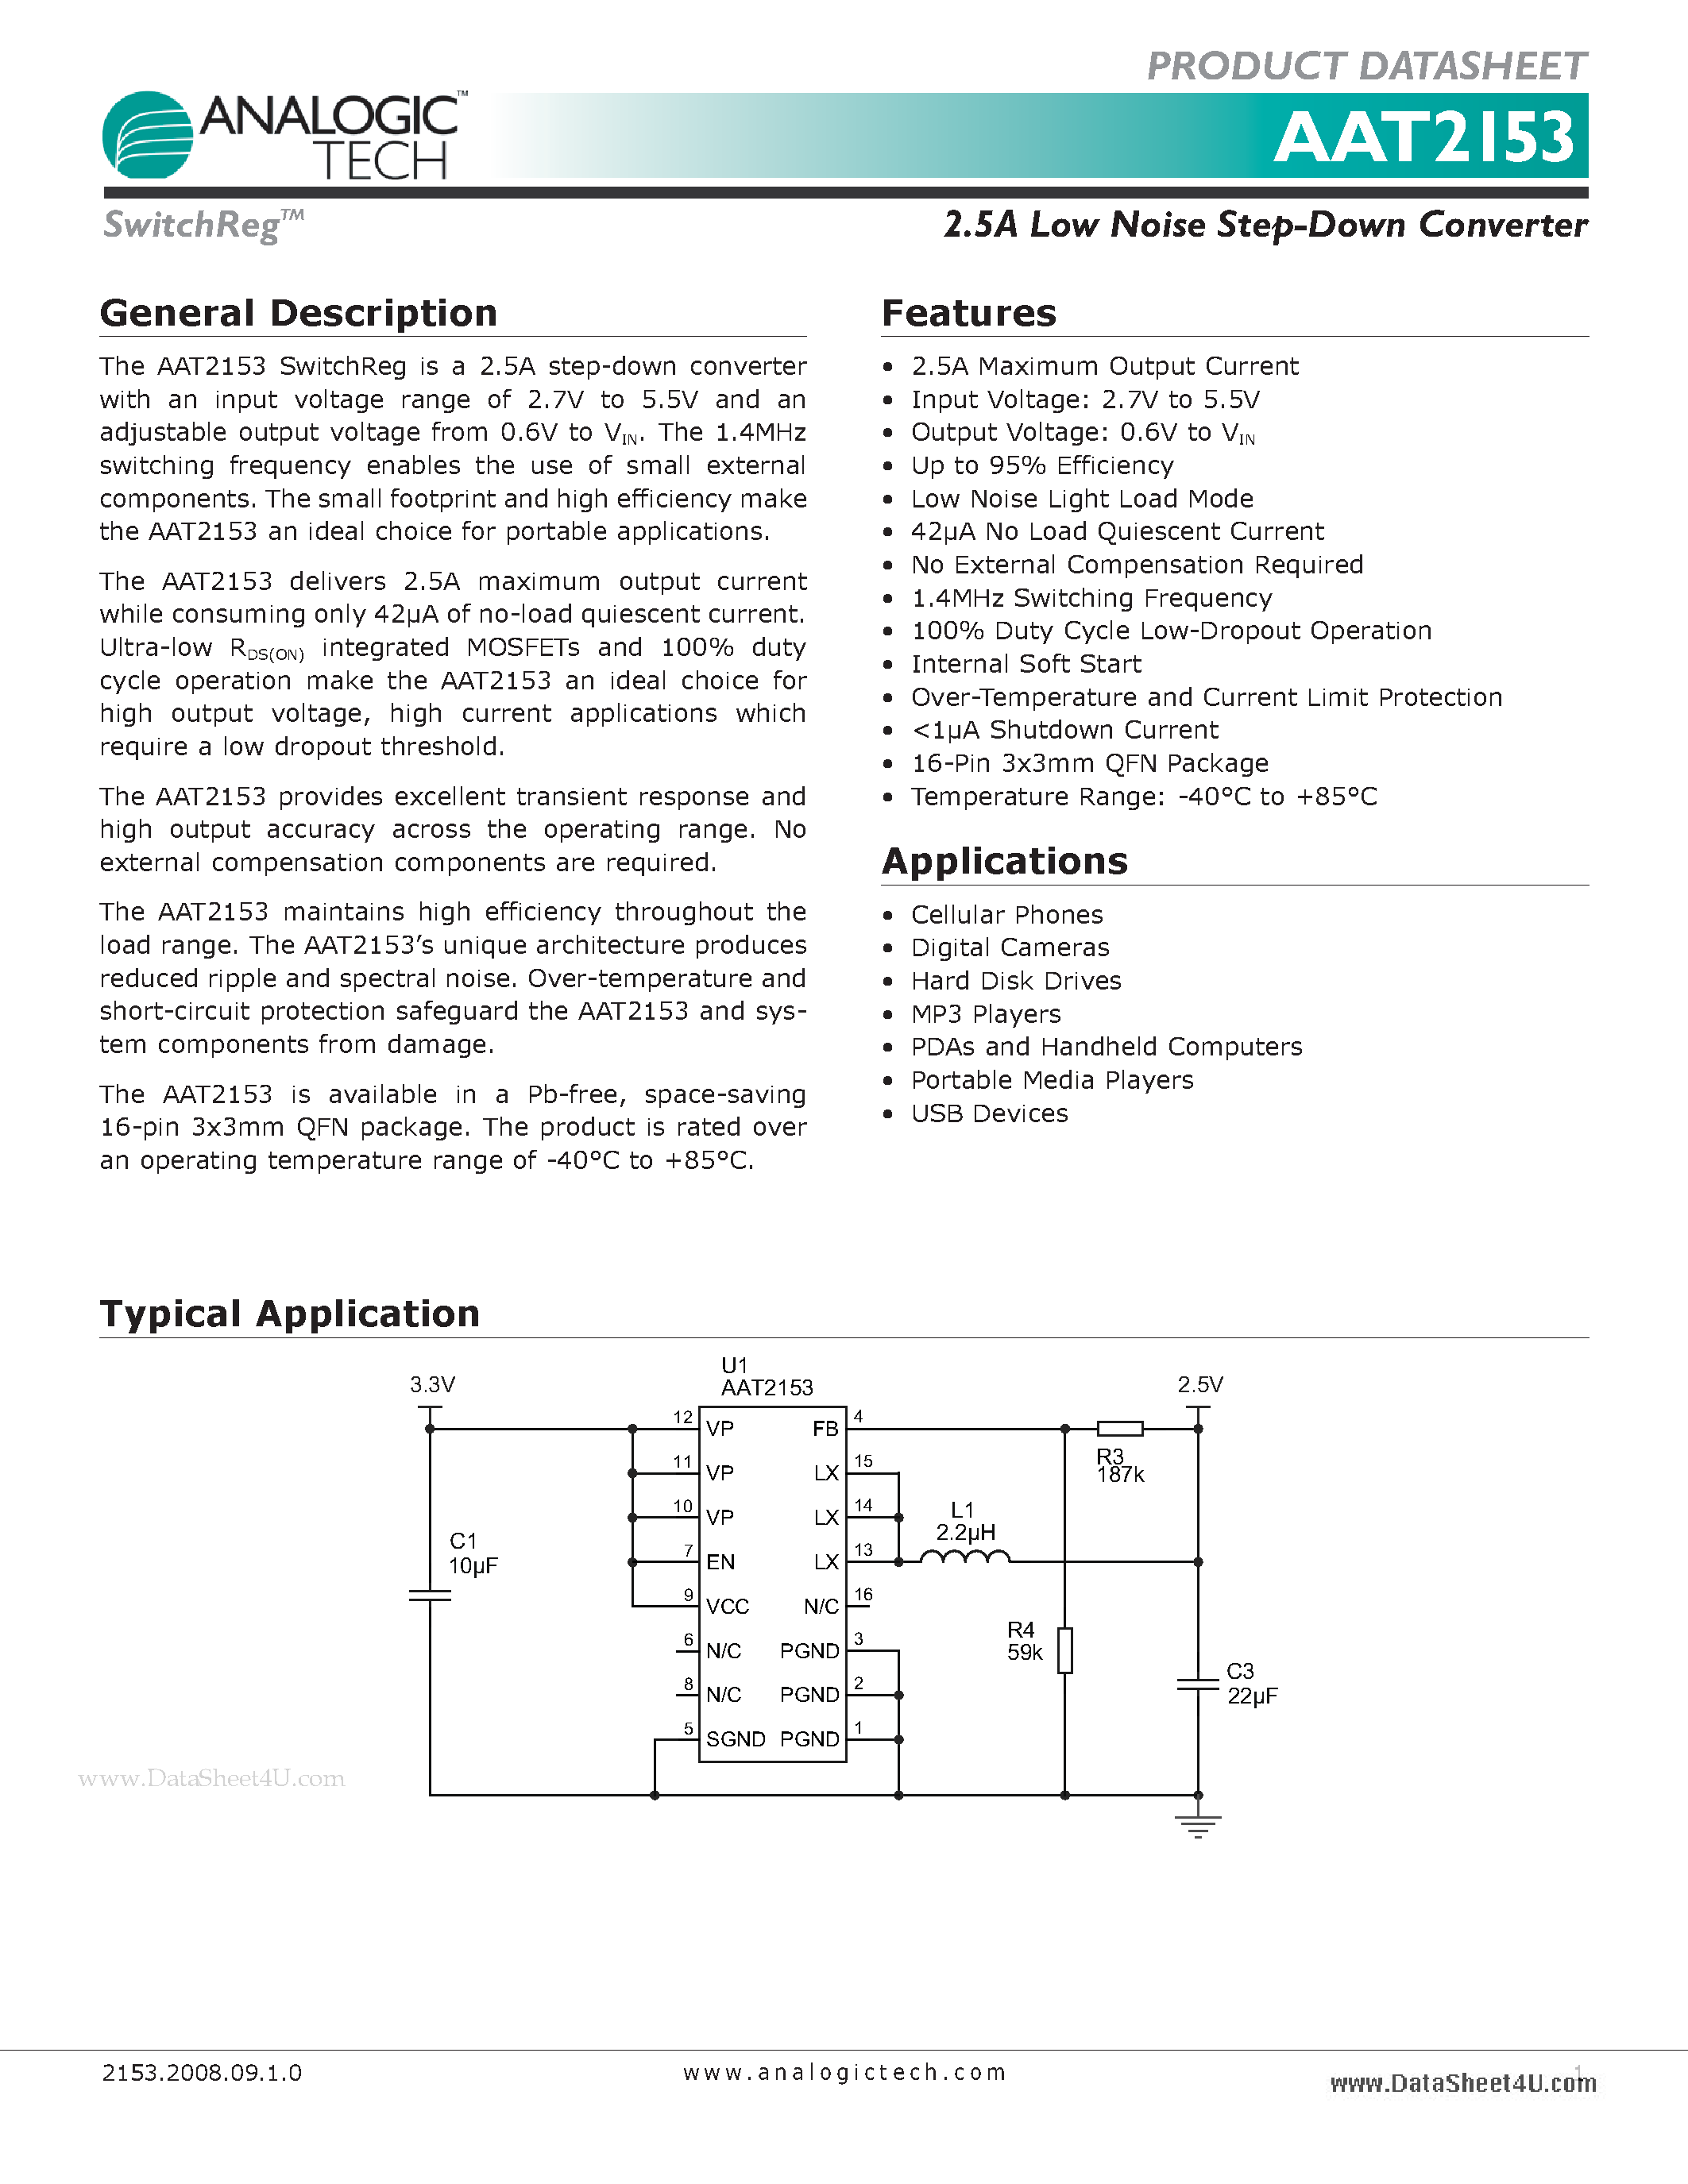 Datasheet AAT2153 - 2.5A Low Noise Step-Down Converter page 1